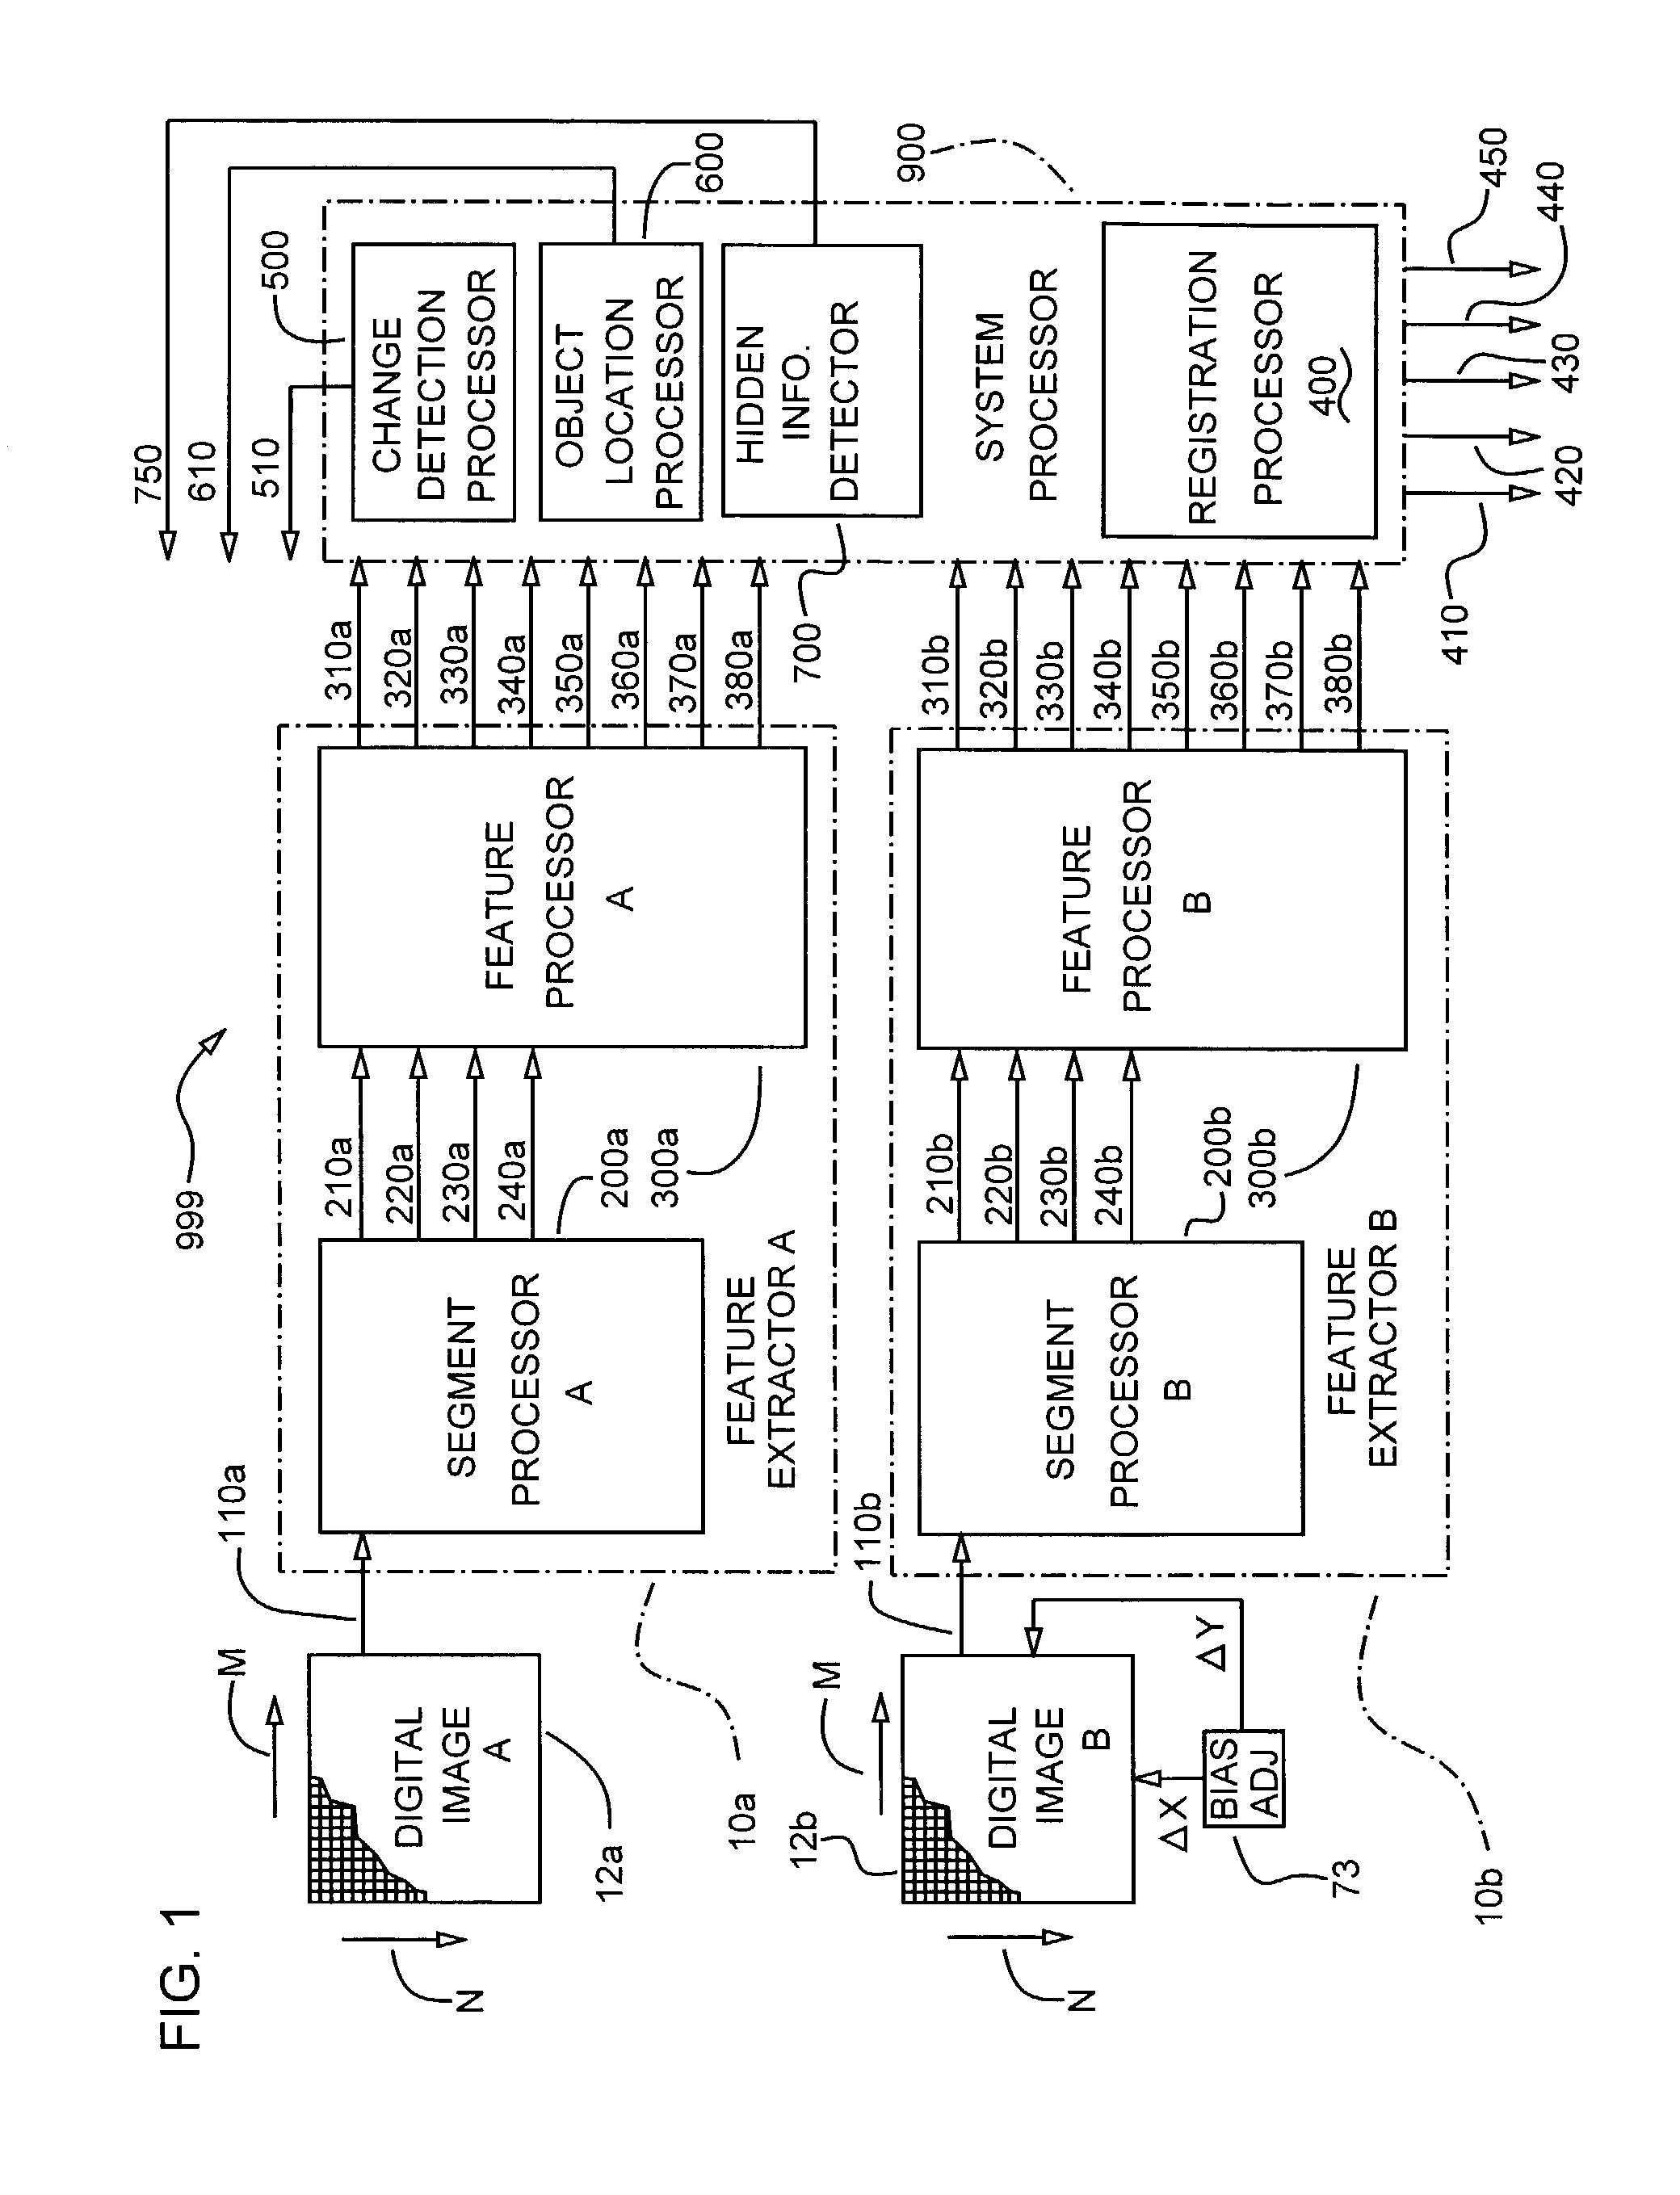 Apparatus and method for characterizing digital images using a two axis image sorting technique